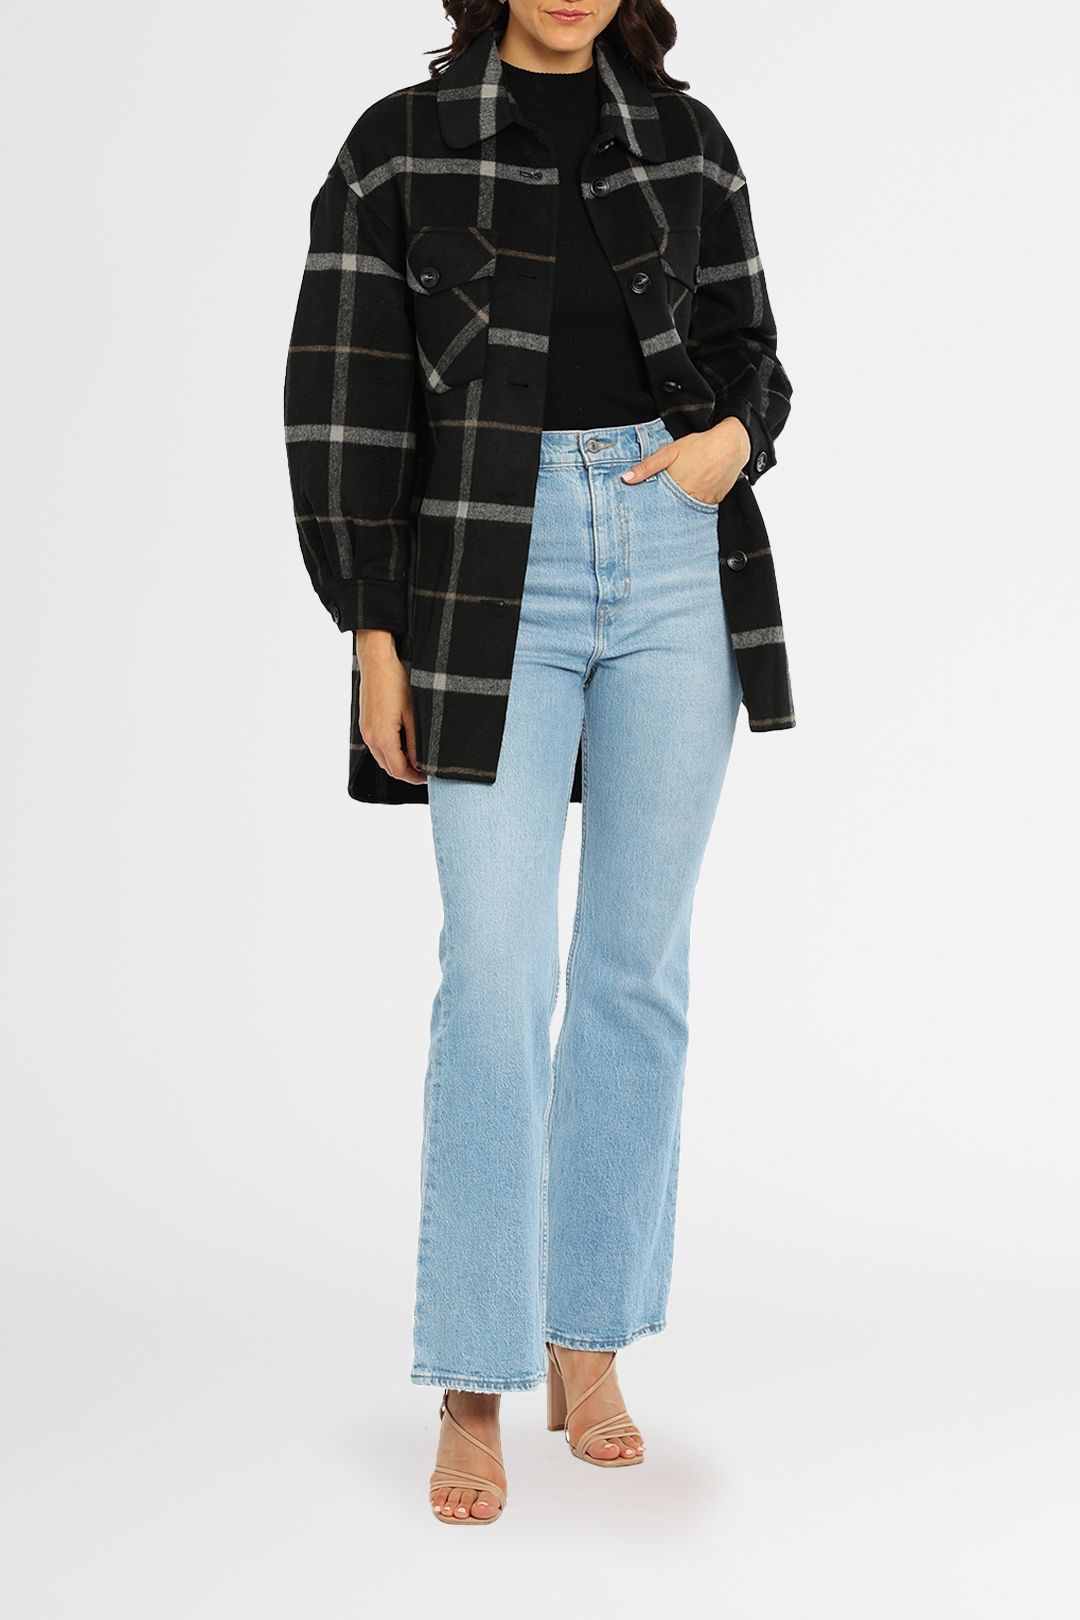 Belle and Bloom Rivers Edge Plaid Shacket Black